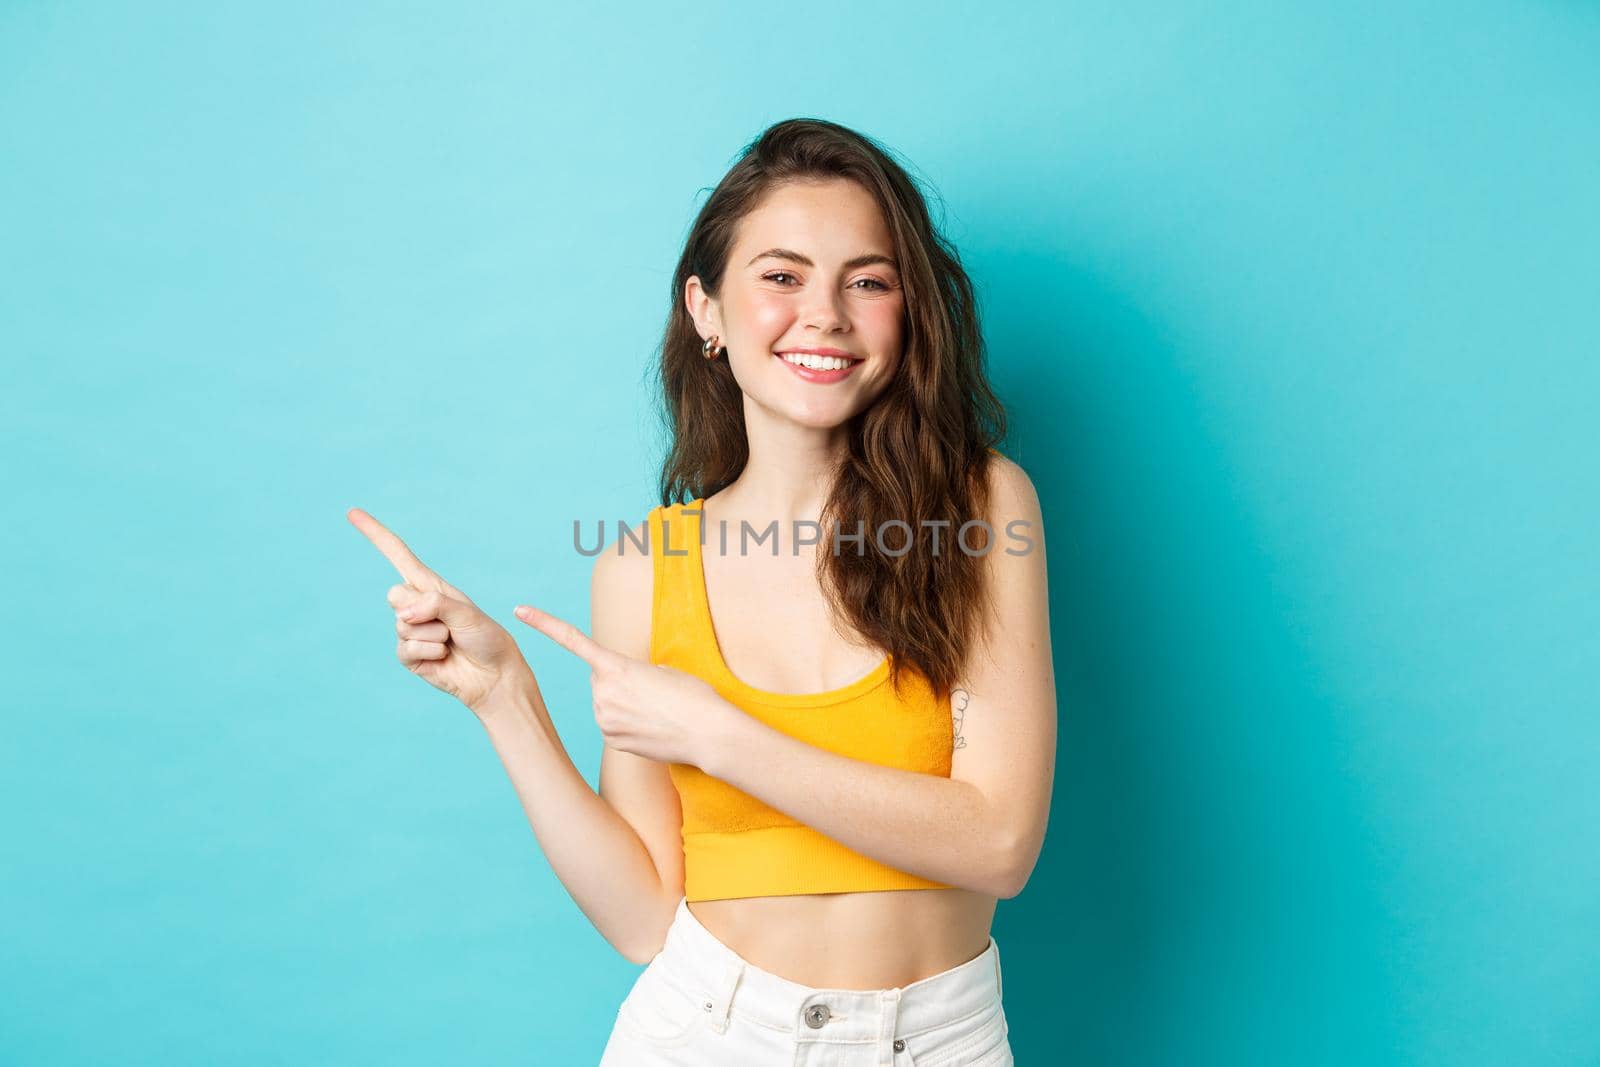 Beautiful young woman looking happy, smiling with teeth, inviting to check out event promo, pointing fingers left at copy space, standing over blue background.